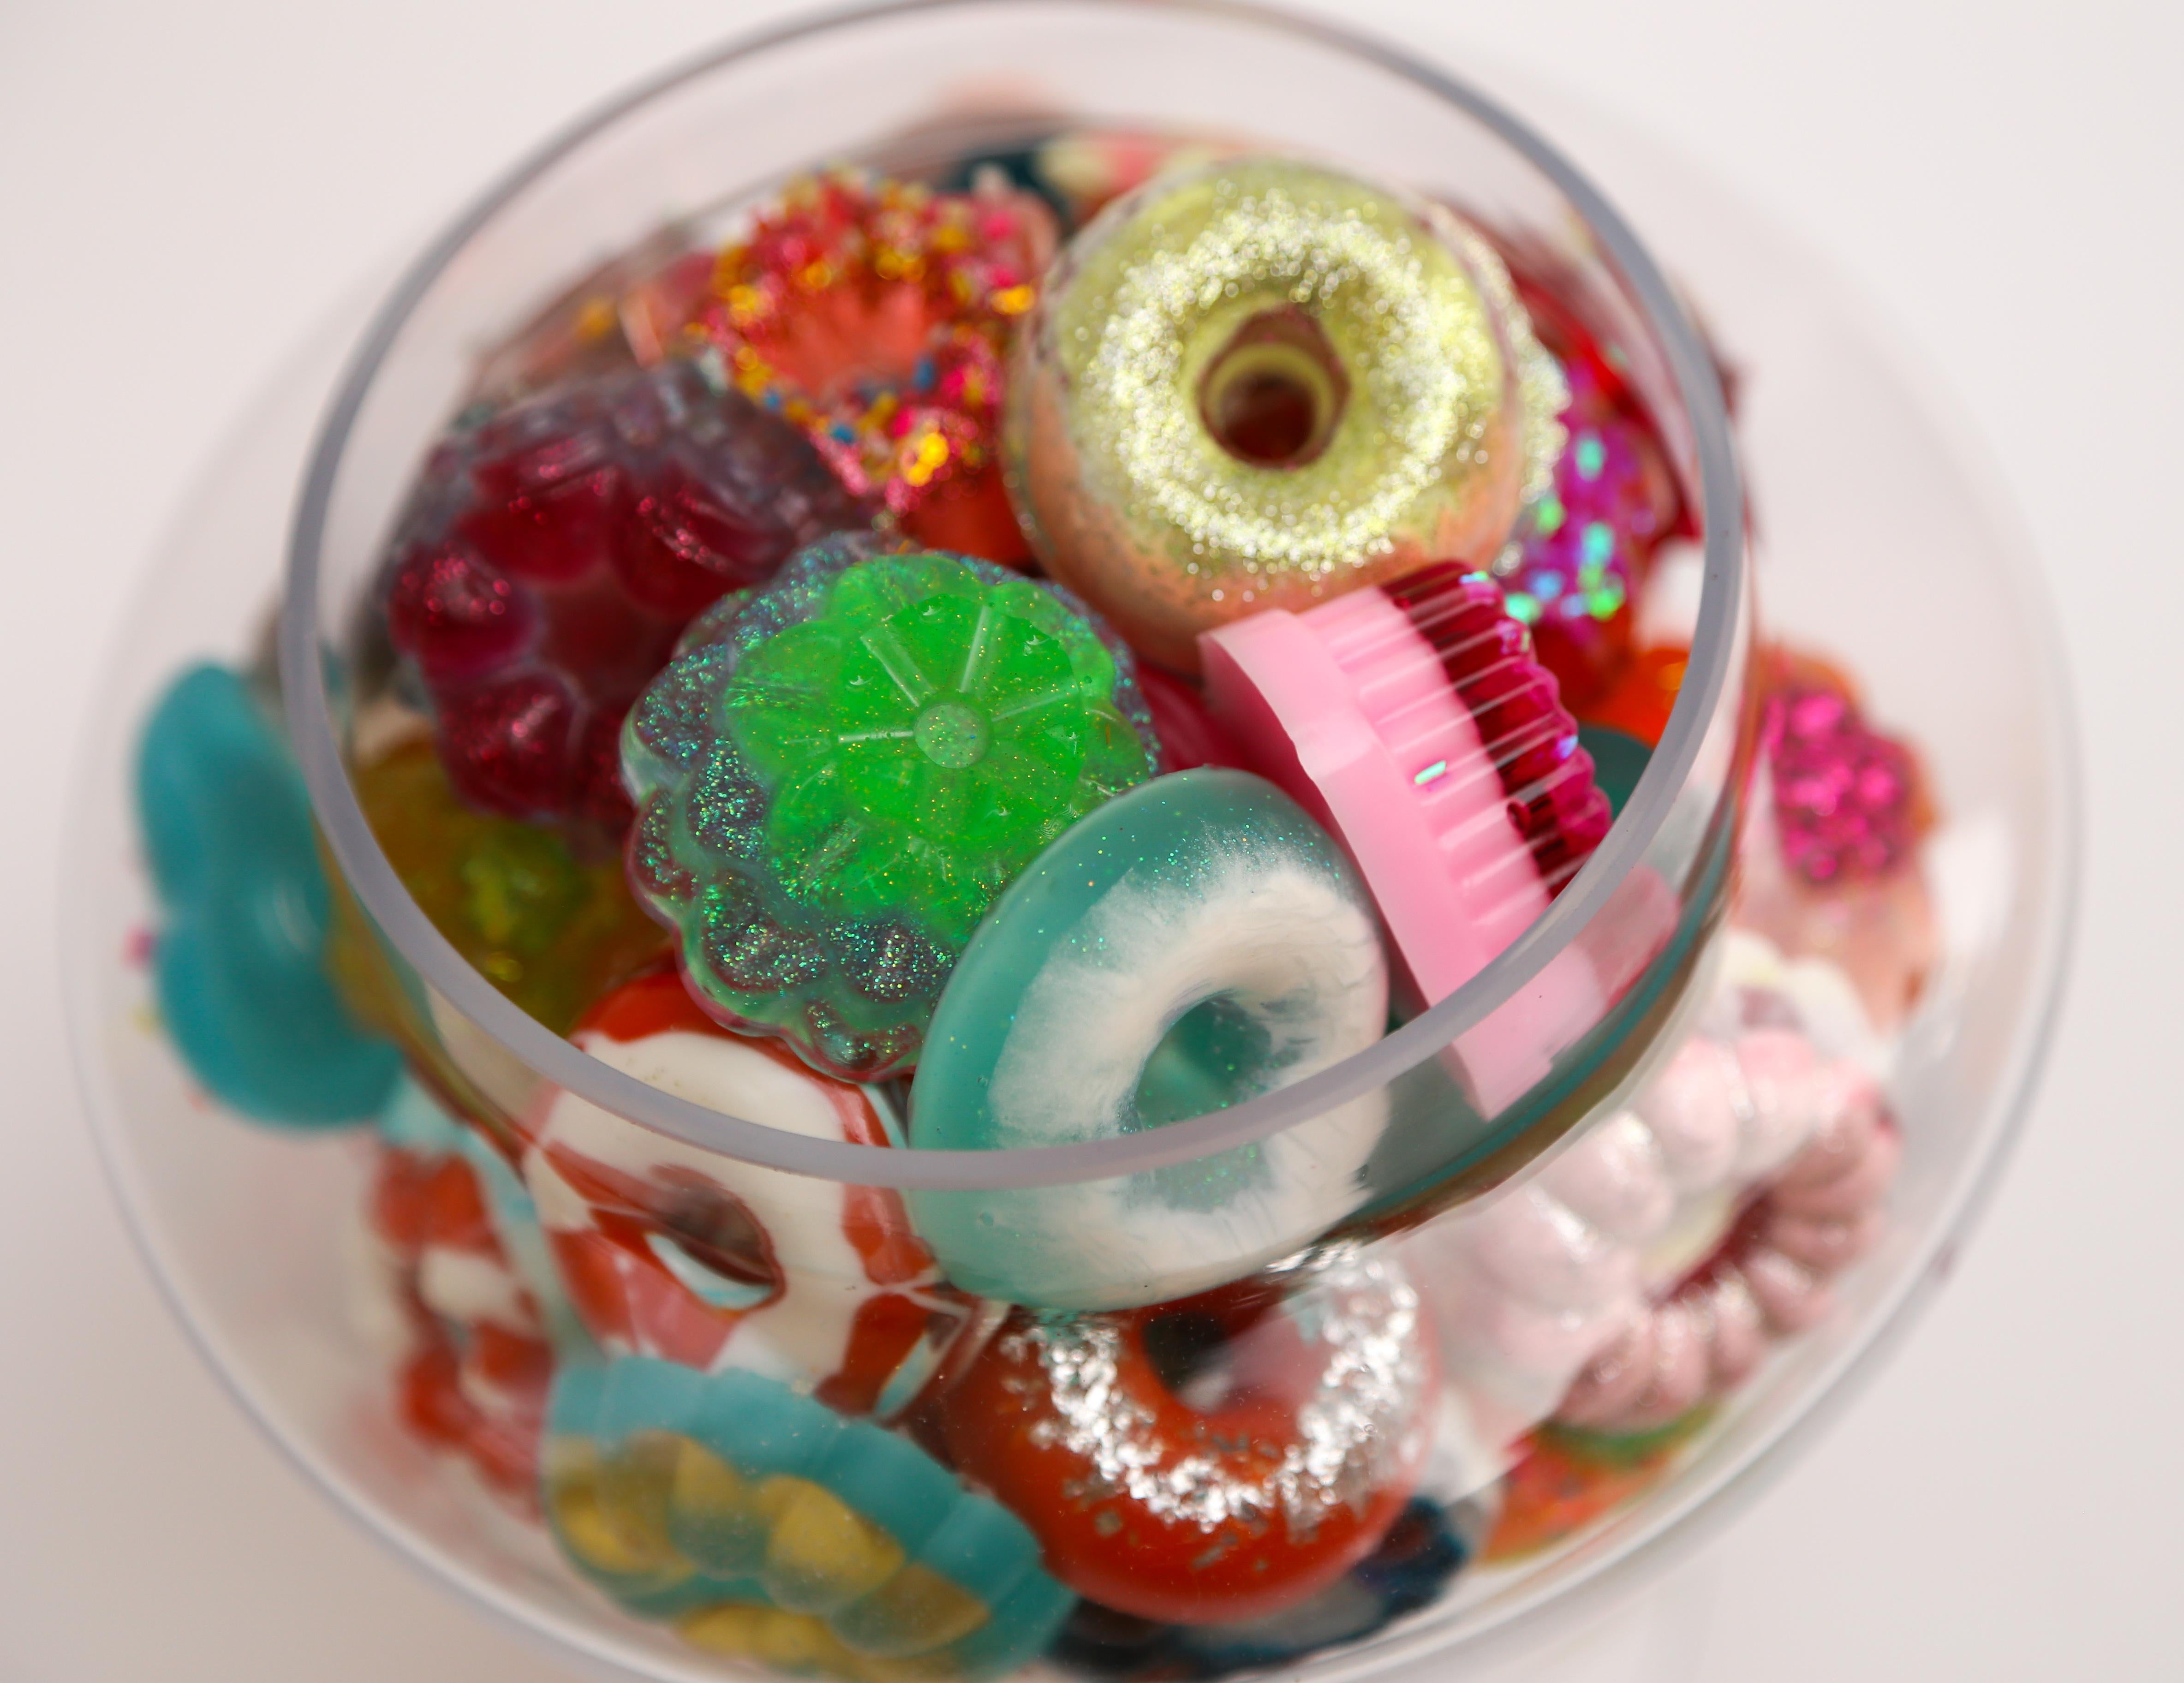 Donut Jar - Handmade Mini Resin Donuts in Glass Candy Jar / colorful  - Pop Art Sculpture by Betsy Enzensberger